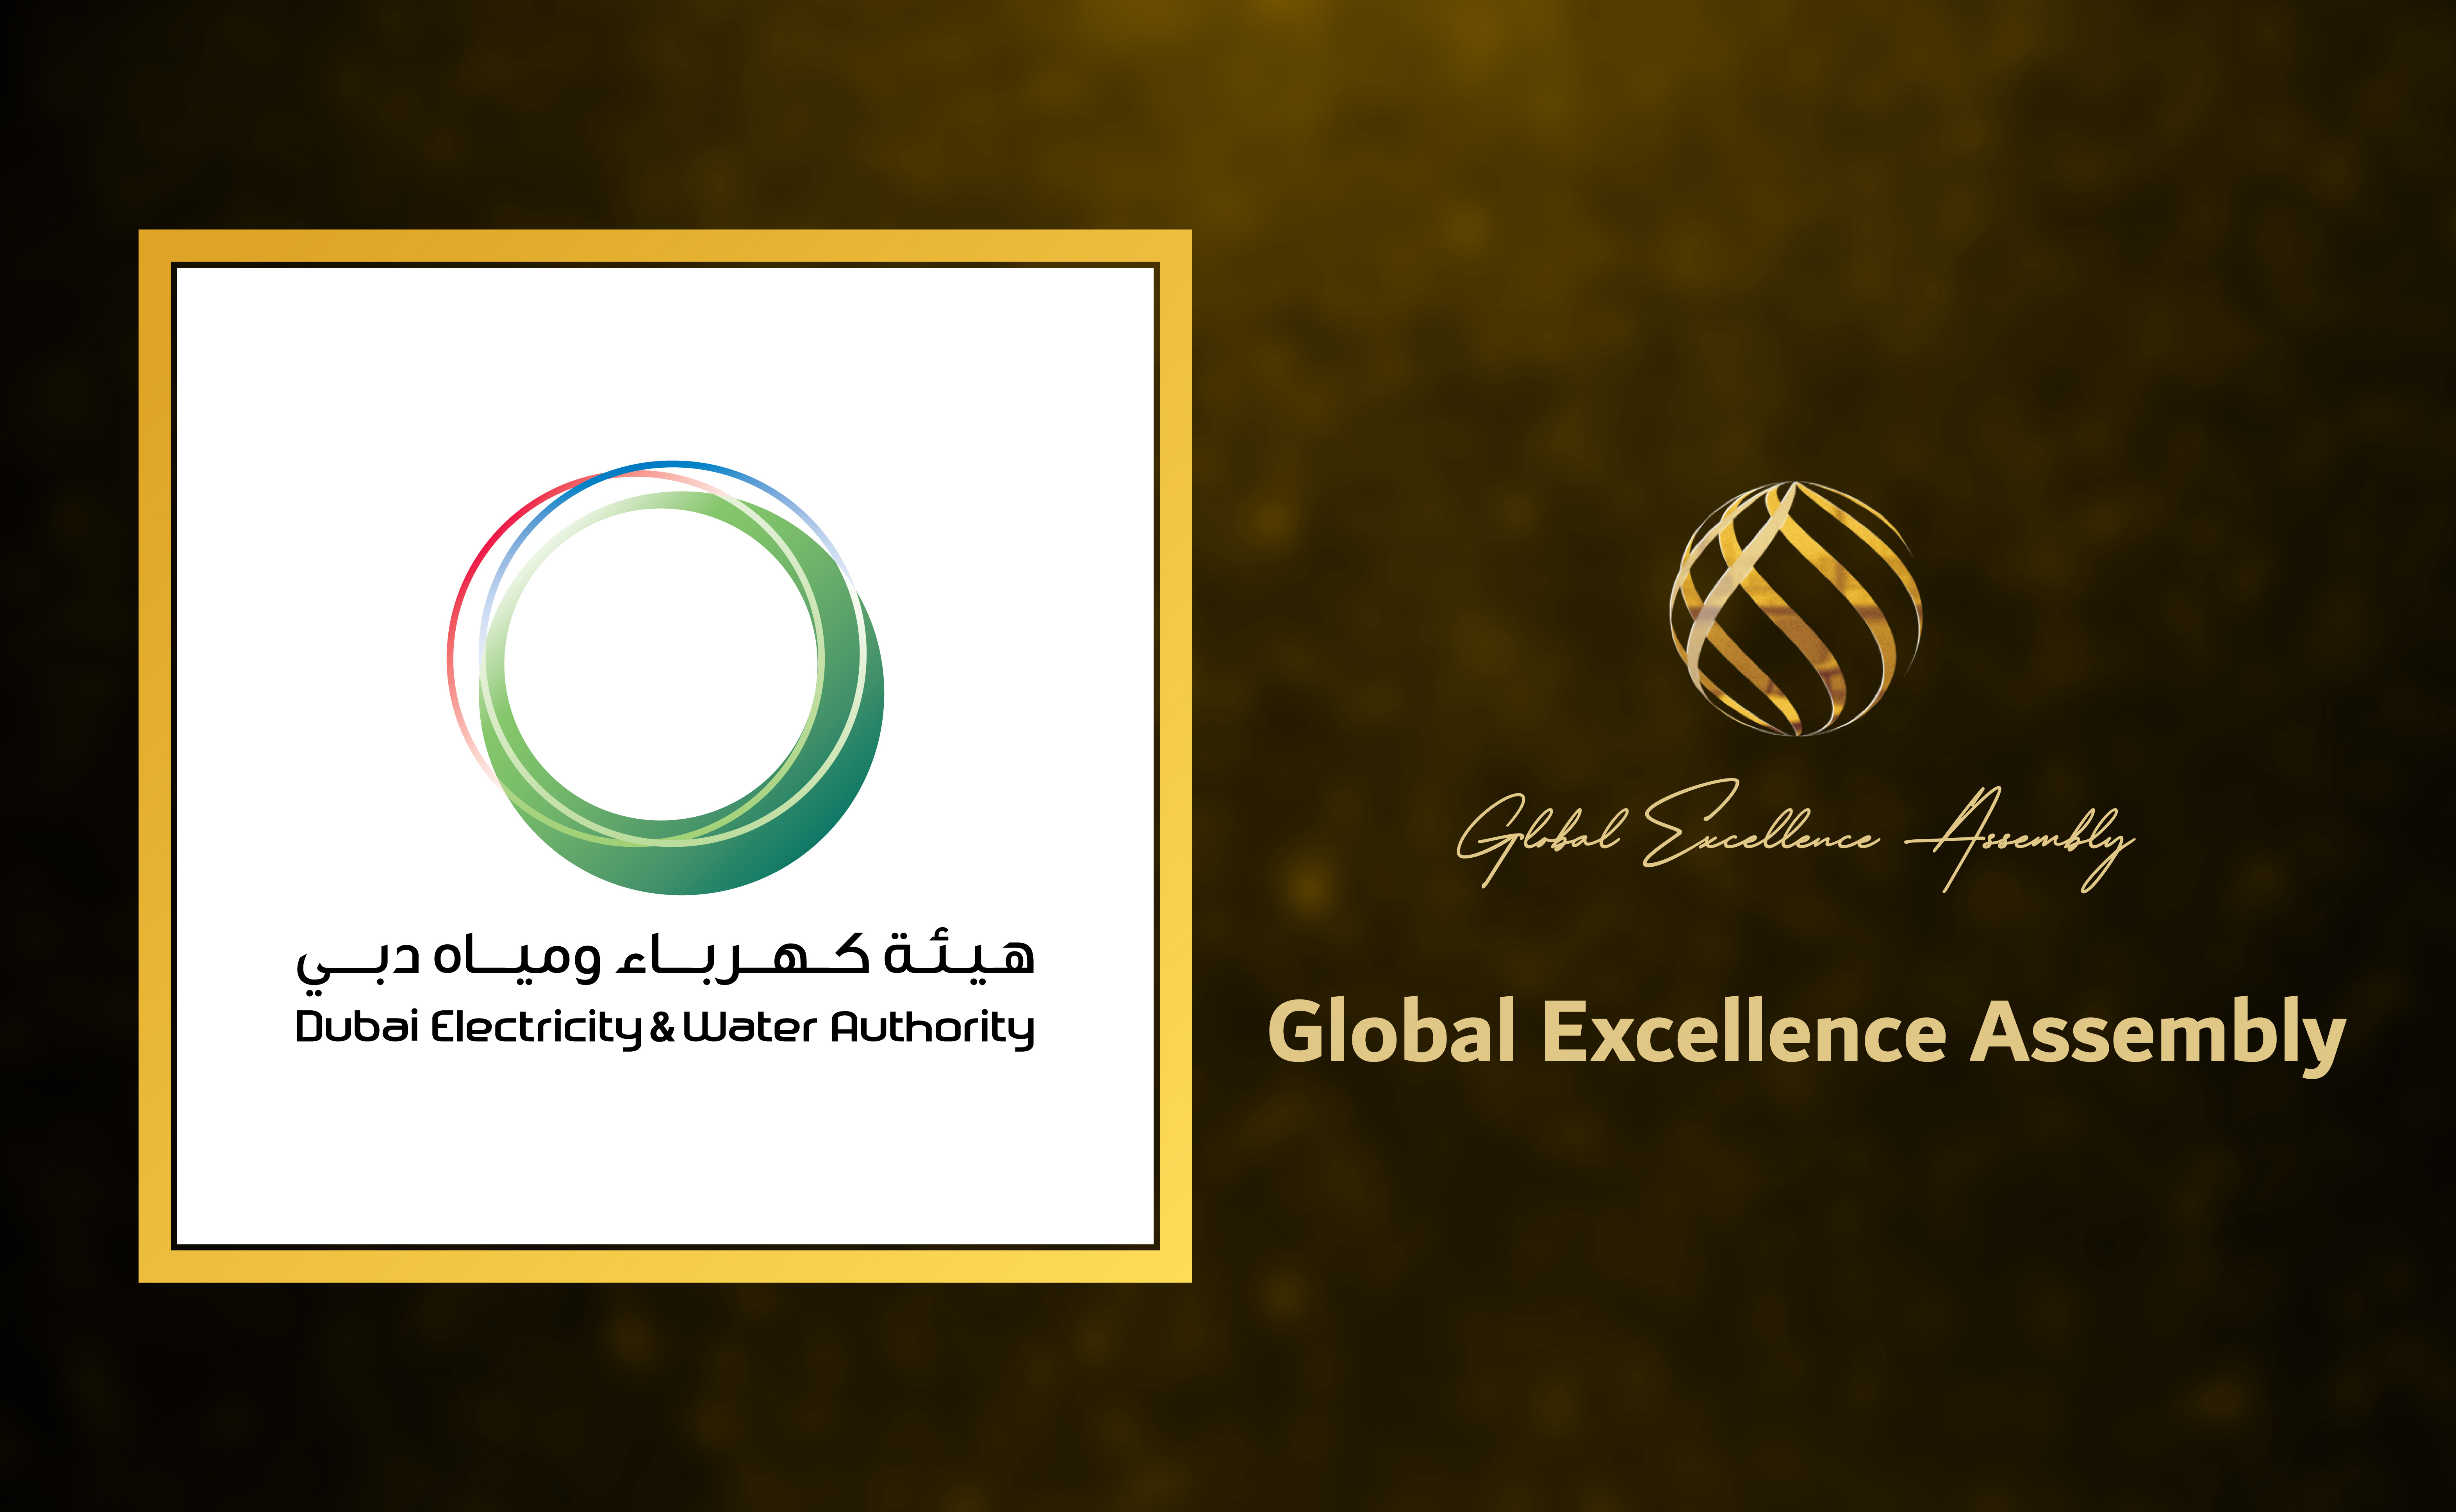  DEWA wins the Organizational Achievements award at the Global Excellence Assembly Awards 2022